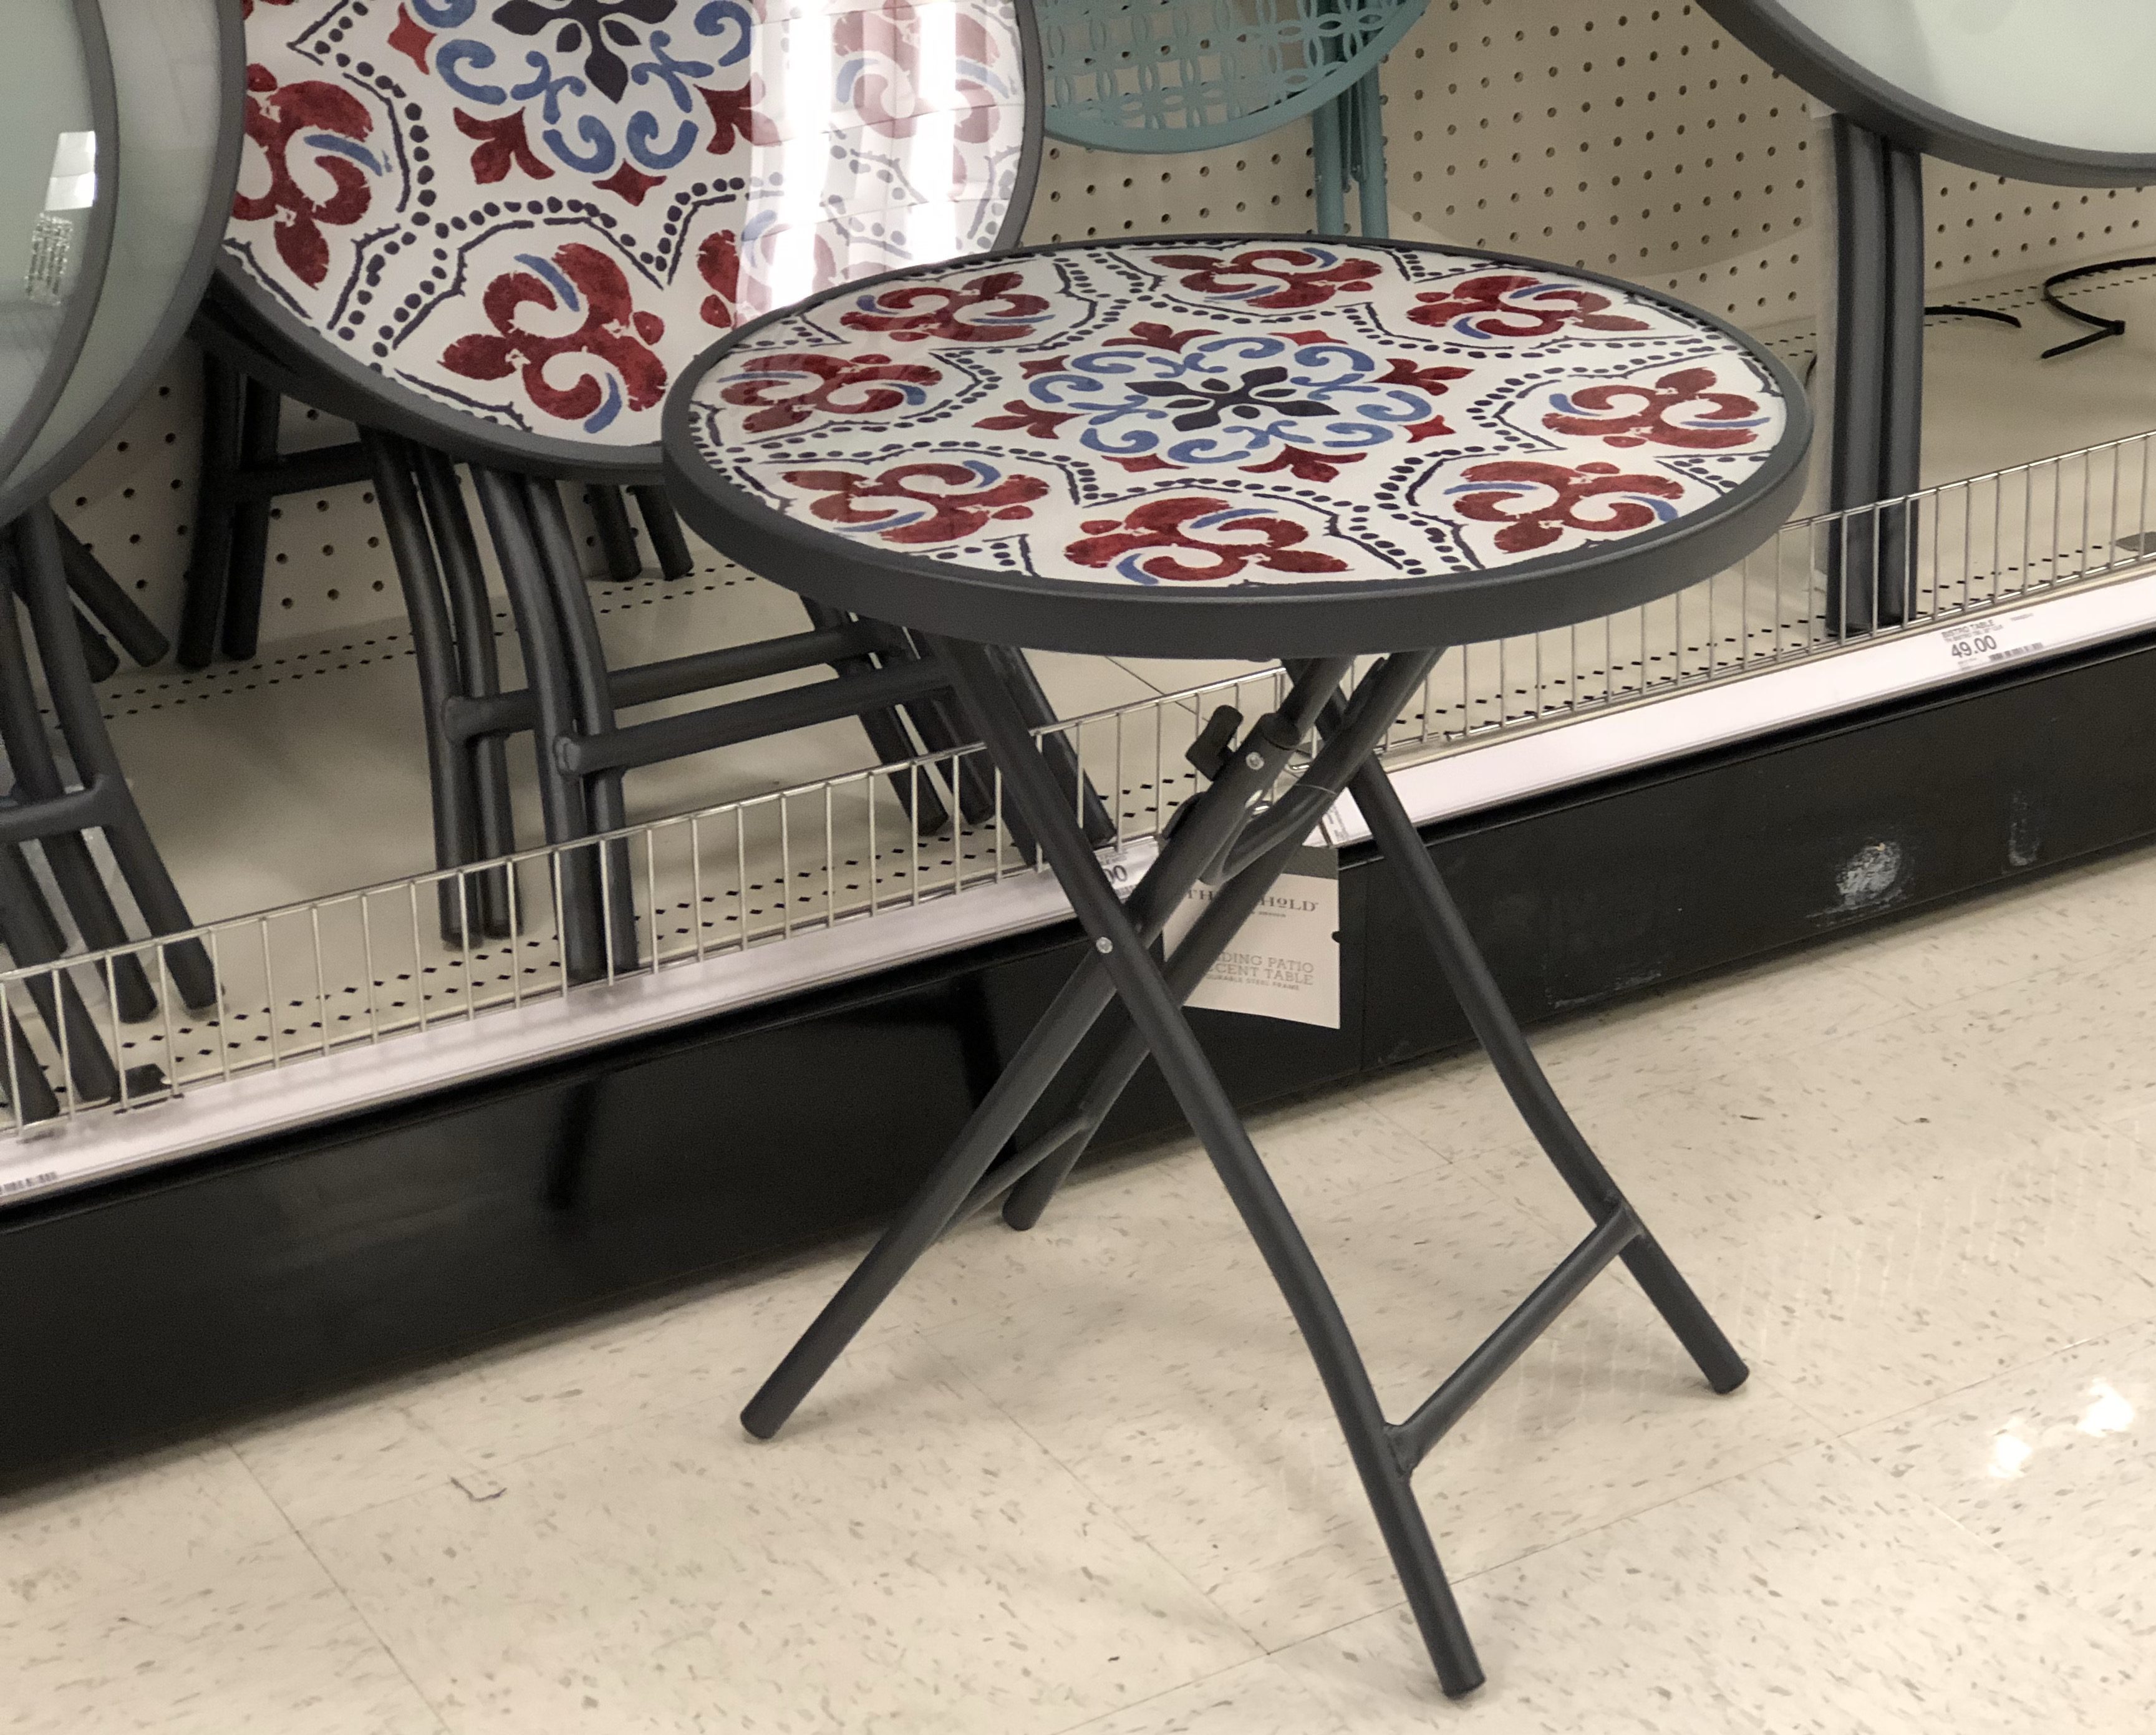 target smith hawken piece patio bistro set shipped threshold glass folding accent table tan regularly use code ping the off garden furniture and decor cartwheel nate berkus rug